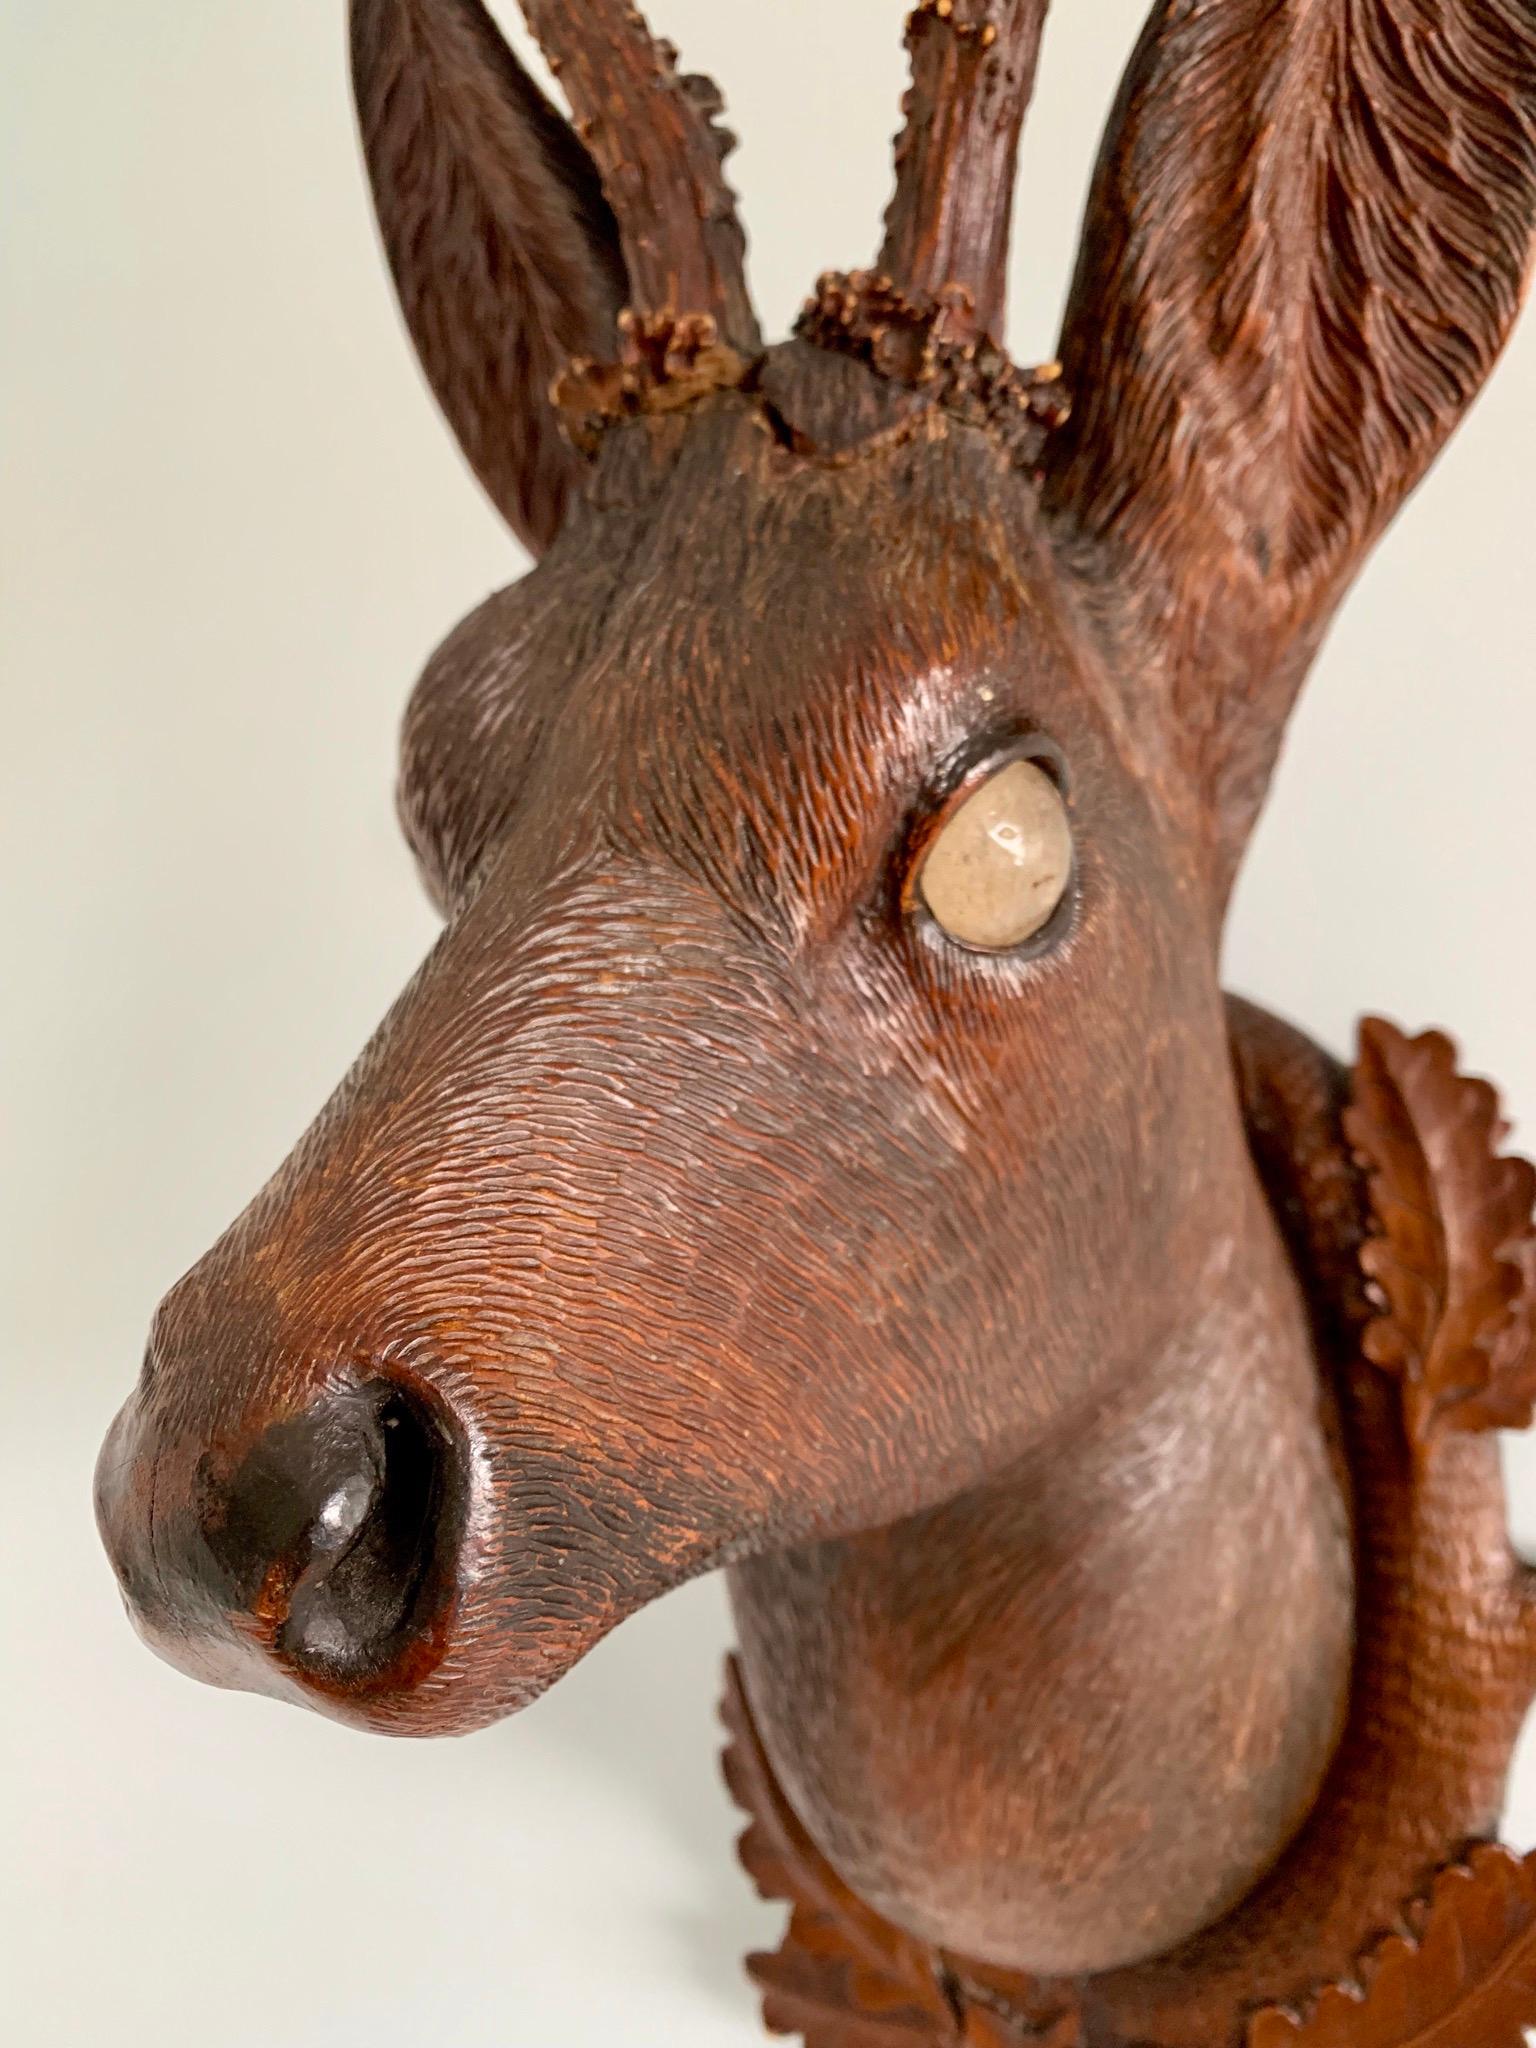 Hand carved Bavarian wood Deer head with real antlers on plaque. The execution is excellent with fur tinted to imitate natural coloring. The eyes are glass. The plaque is carved with oak leaves.